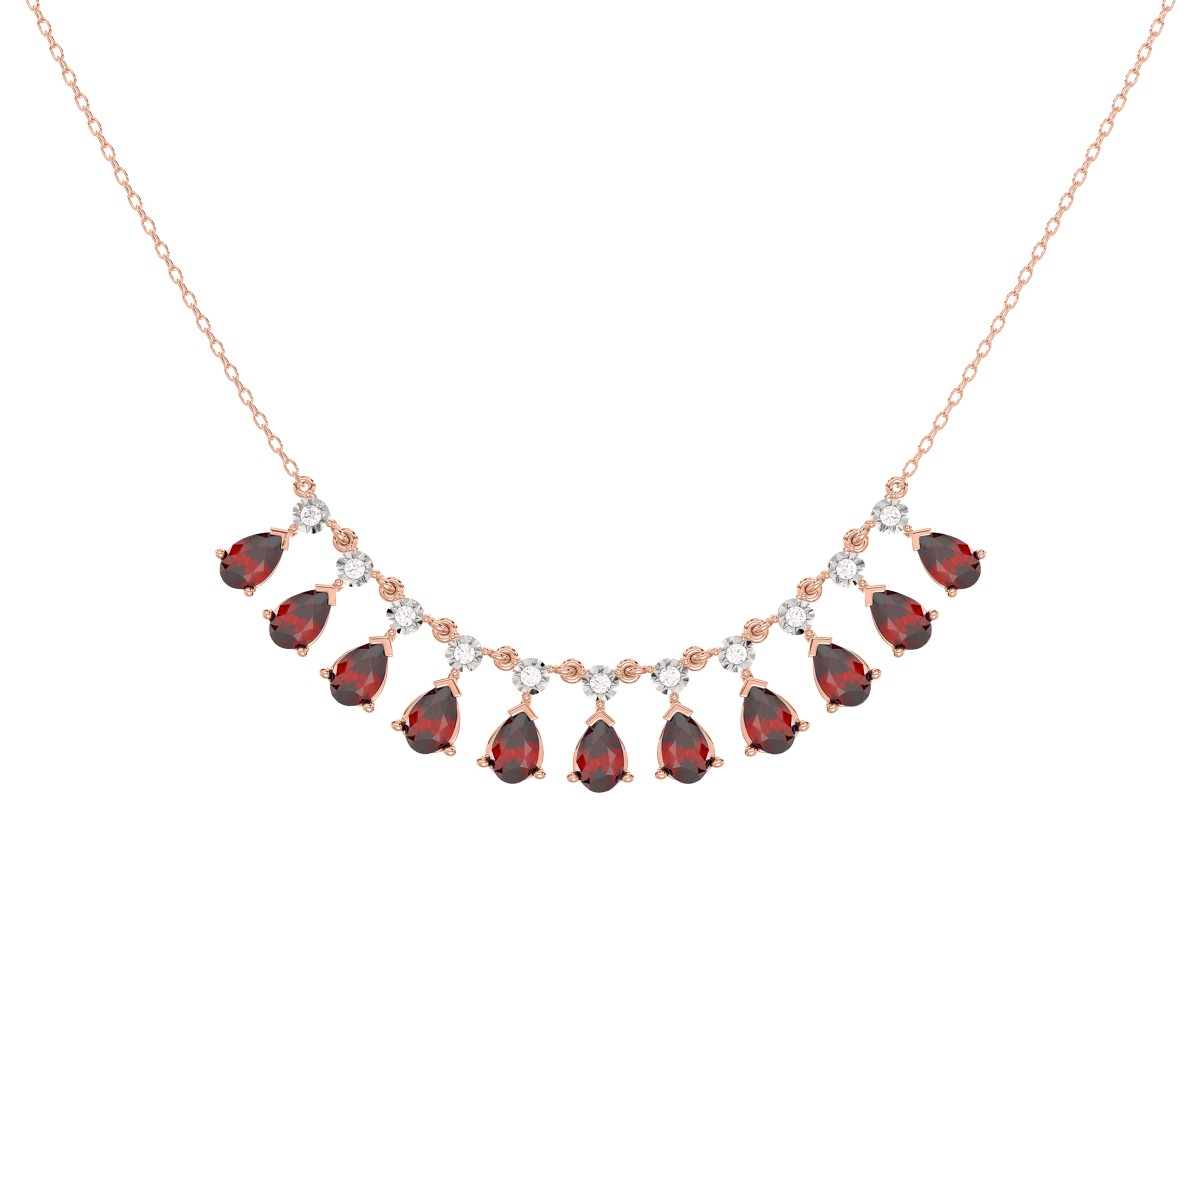 18K ROSE GOLD 2 7/8CT ROUND/PEAR DIAMOND LADIES NECKLACE(COLOR STONE PEAR RUBY DIAMOND 2 7/8CT)